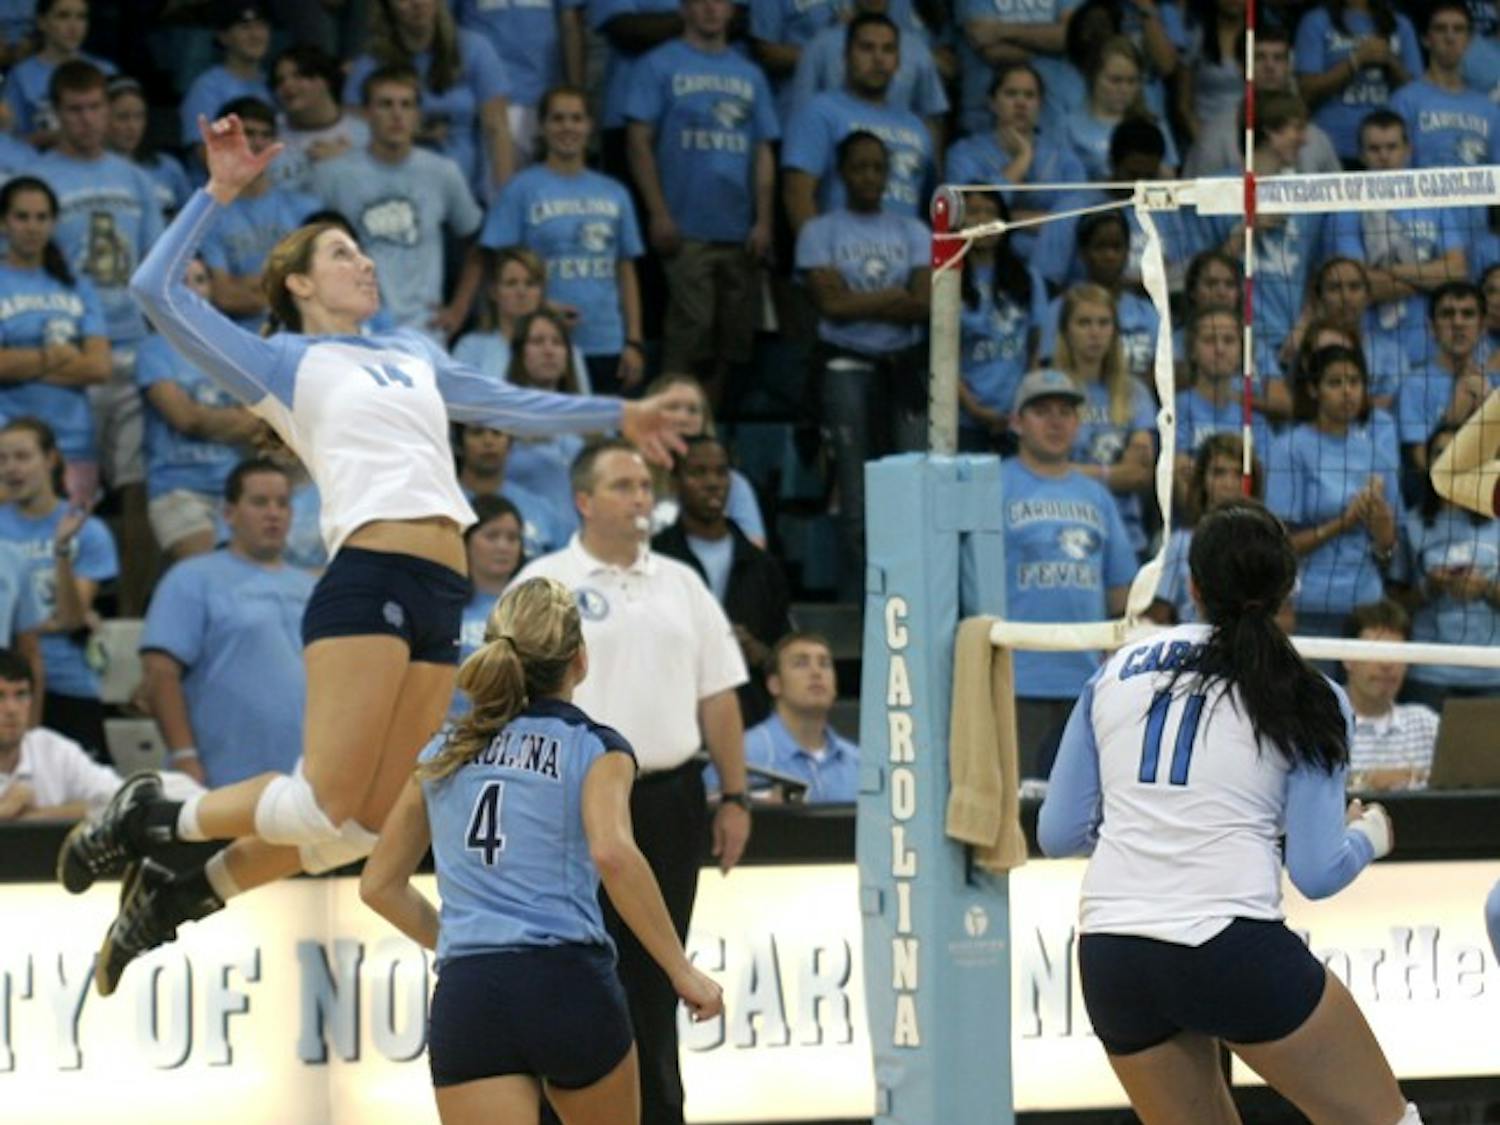 Senior outside hitter Suzanne Haydel rises for a kill. Haydel and her 
fellow seniors have lost only one game at Carmichael Arena this year.